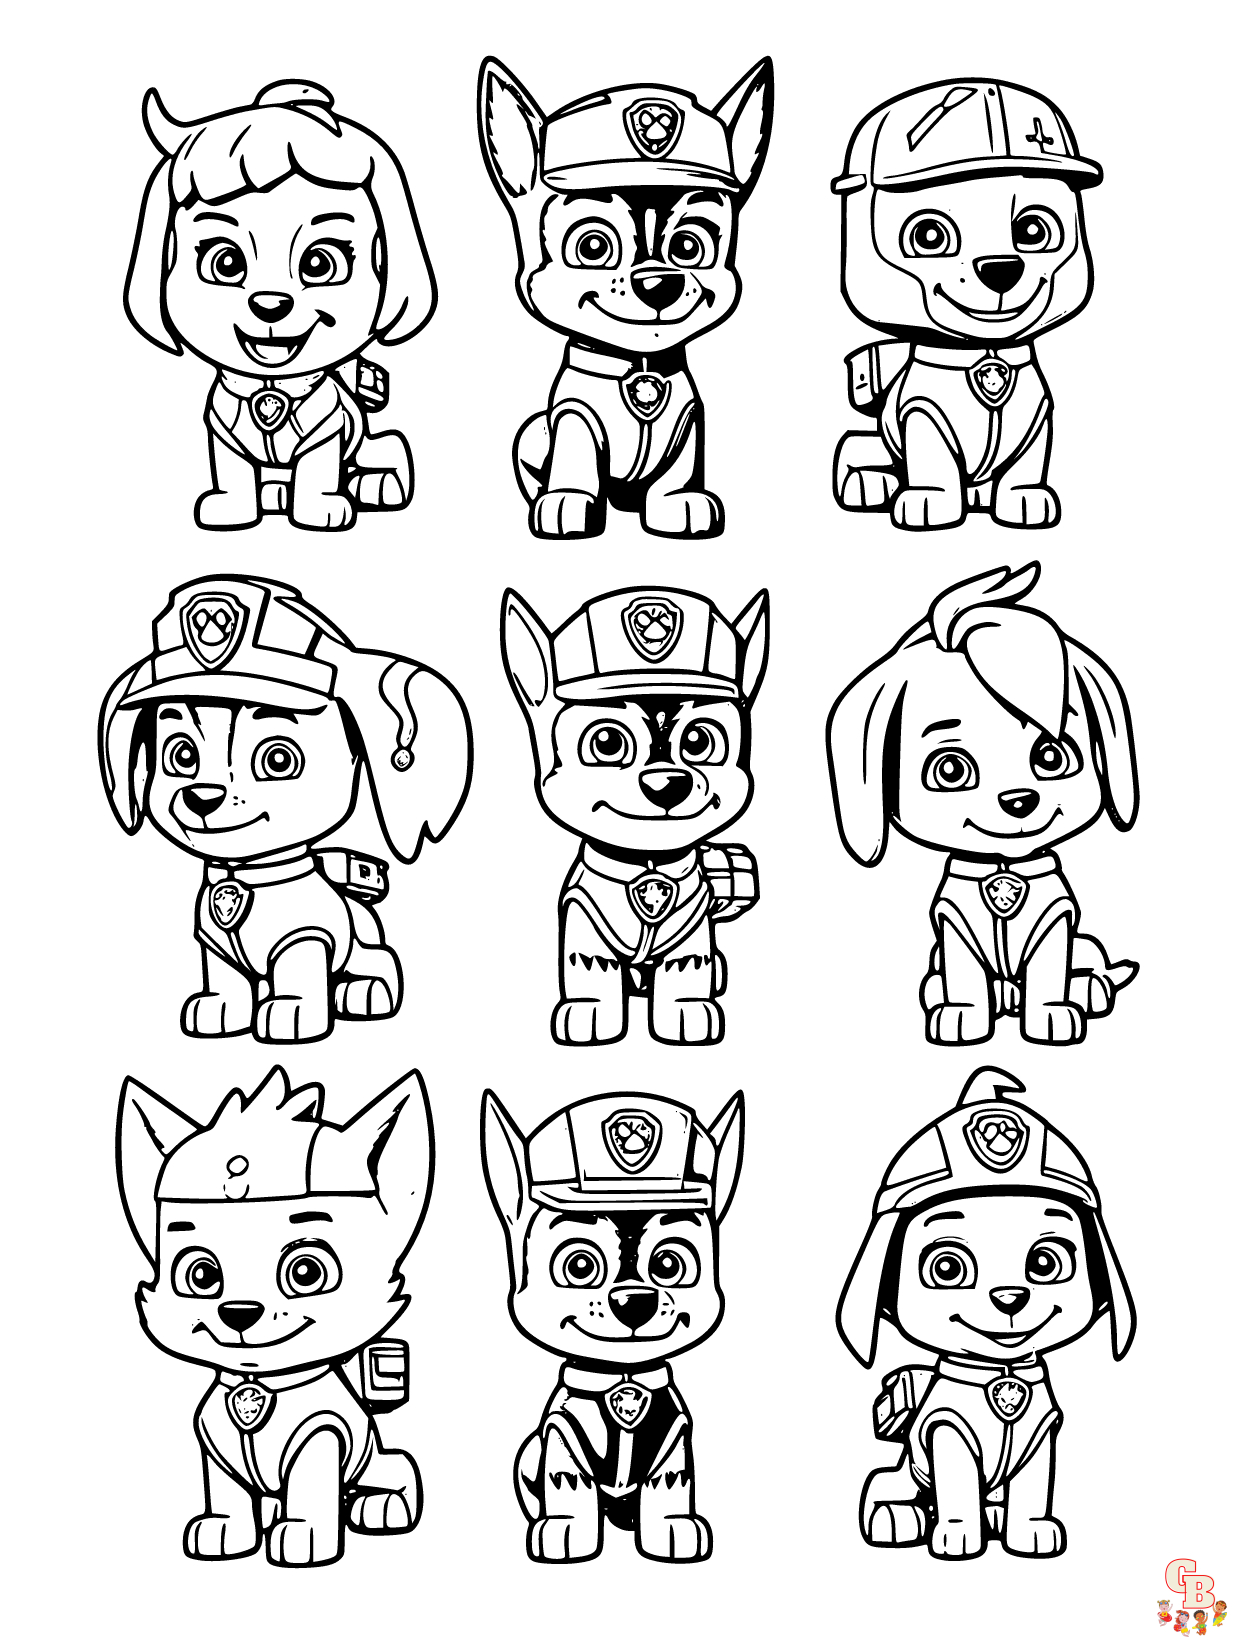 Free Paw Patrol Coloring Pages: Printable And Easy Options - Free Printable Pictures Paw Patrol